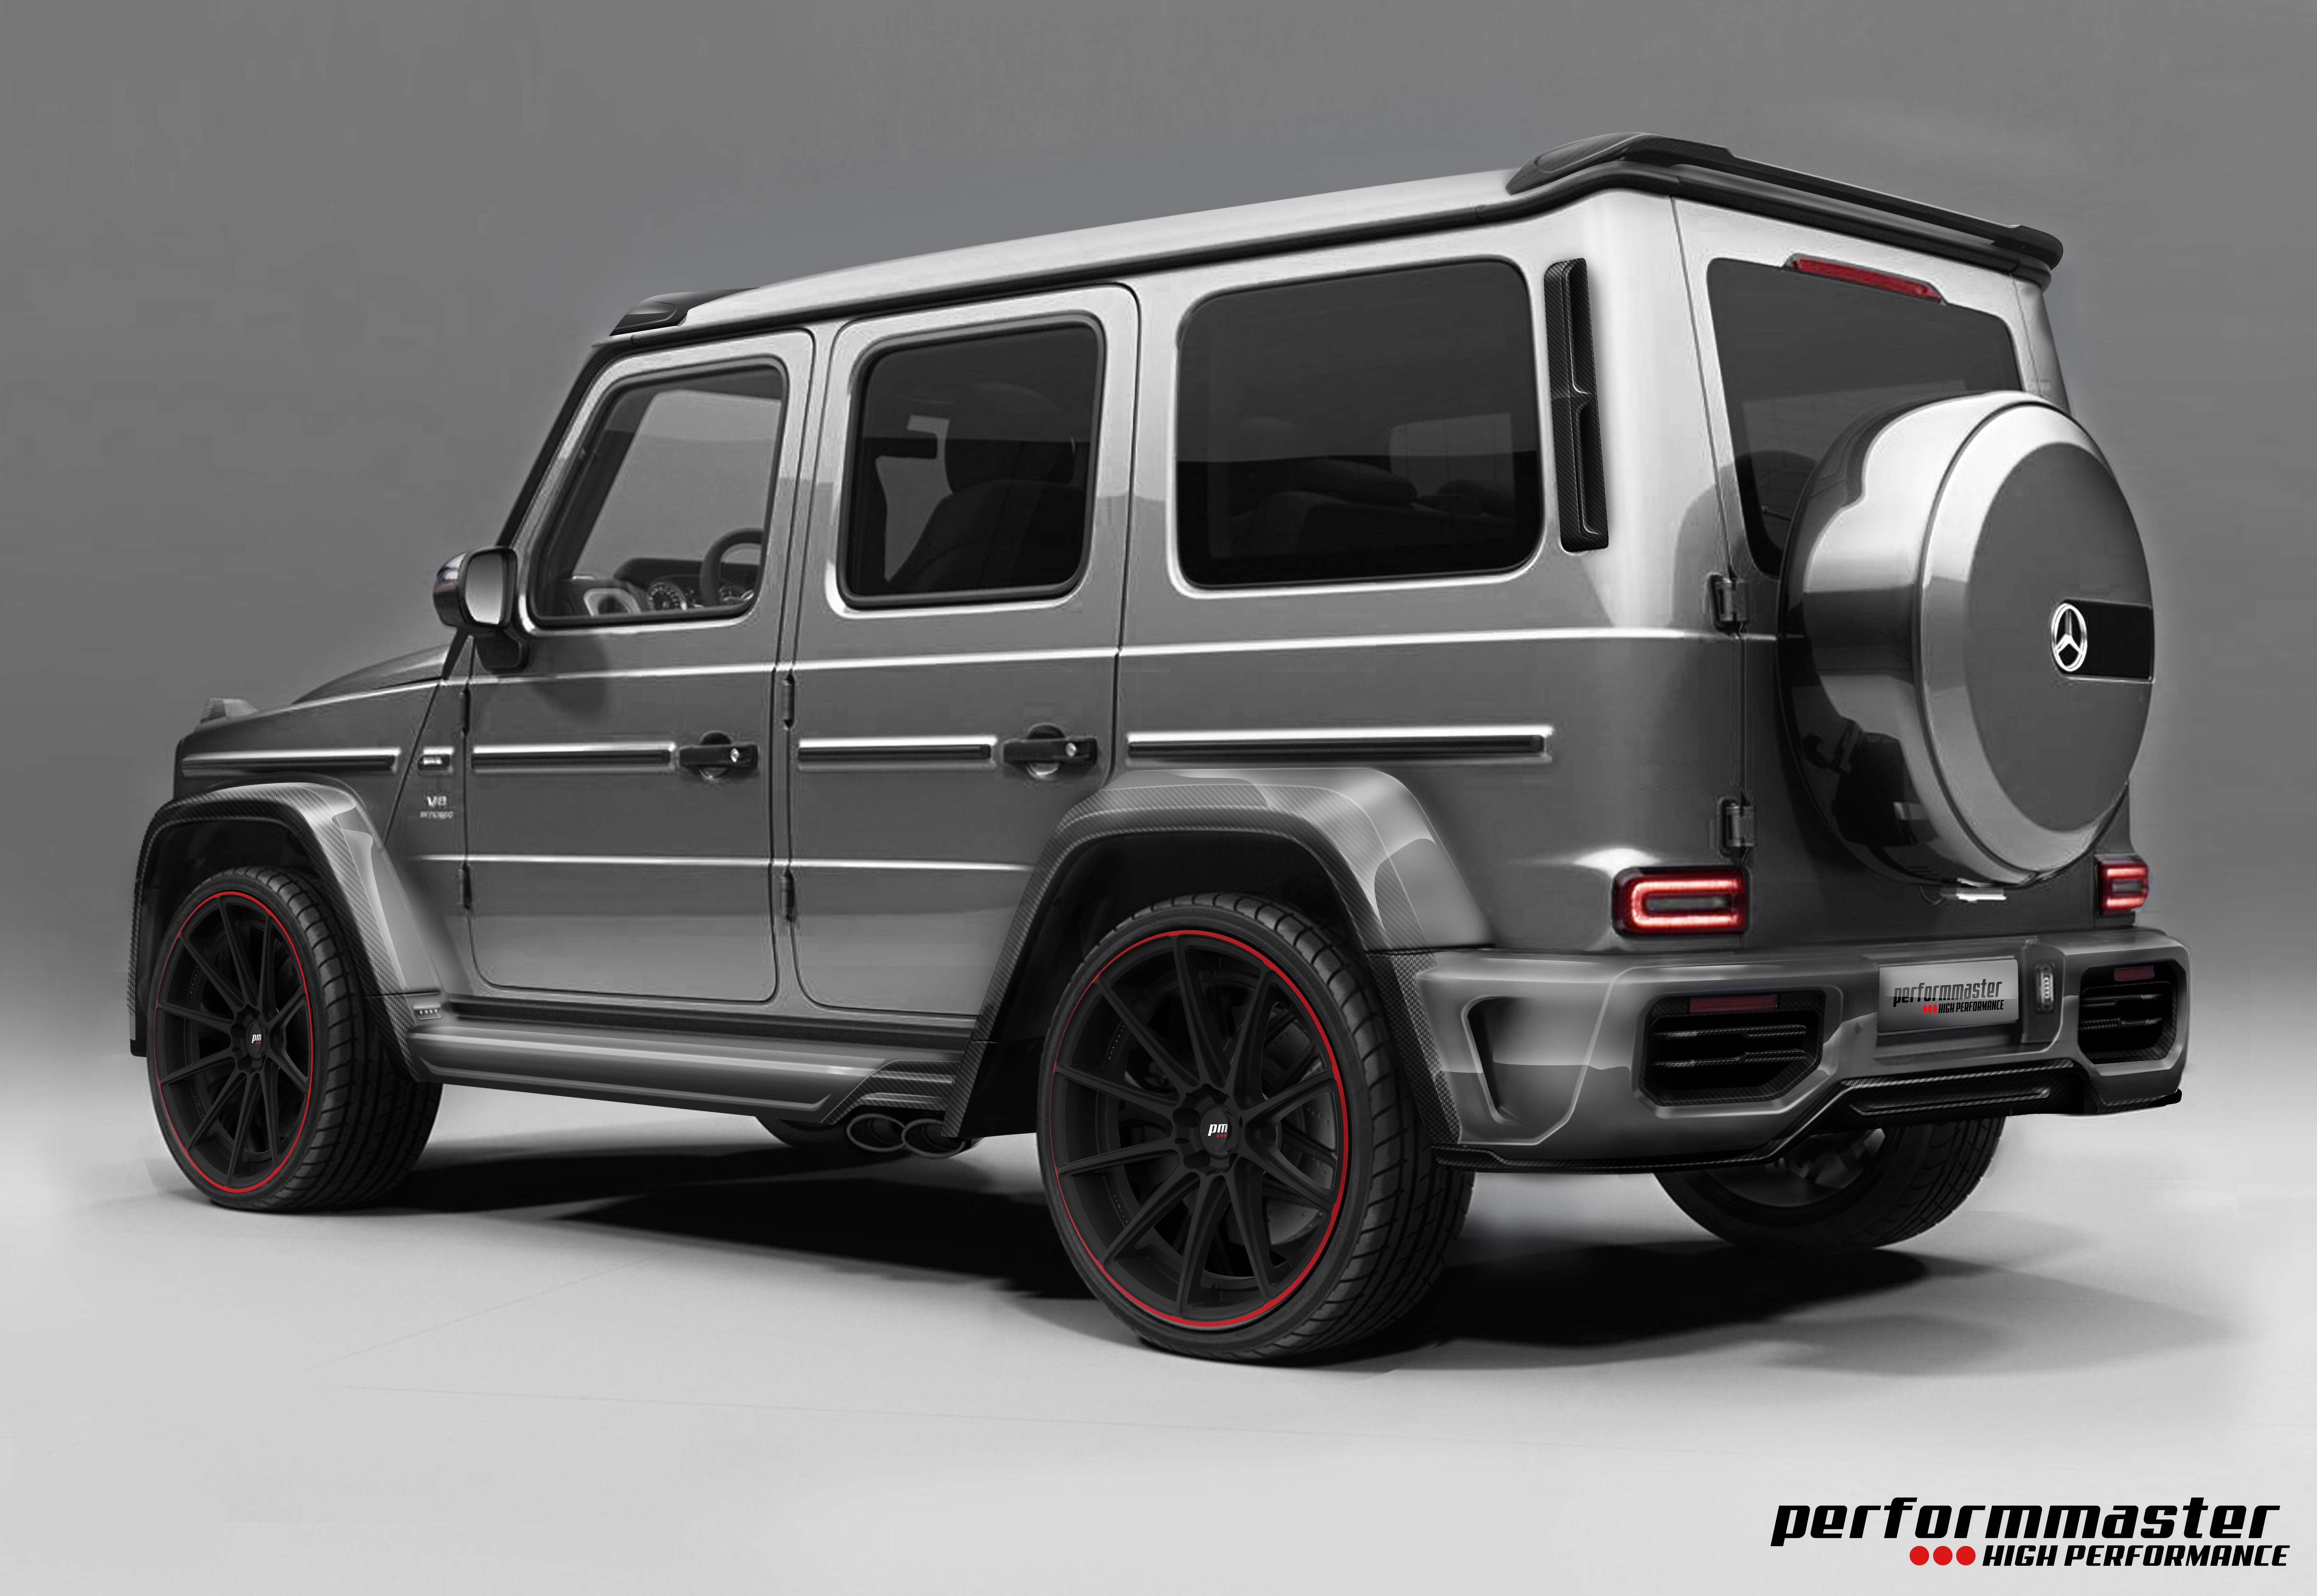 2020 Mercedes-AMG G63 by PerformMaster